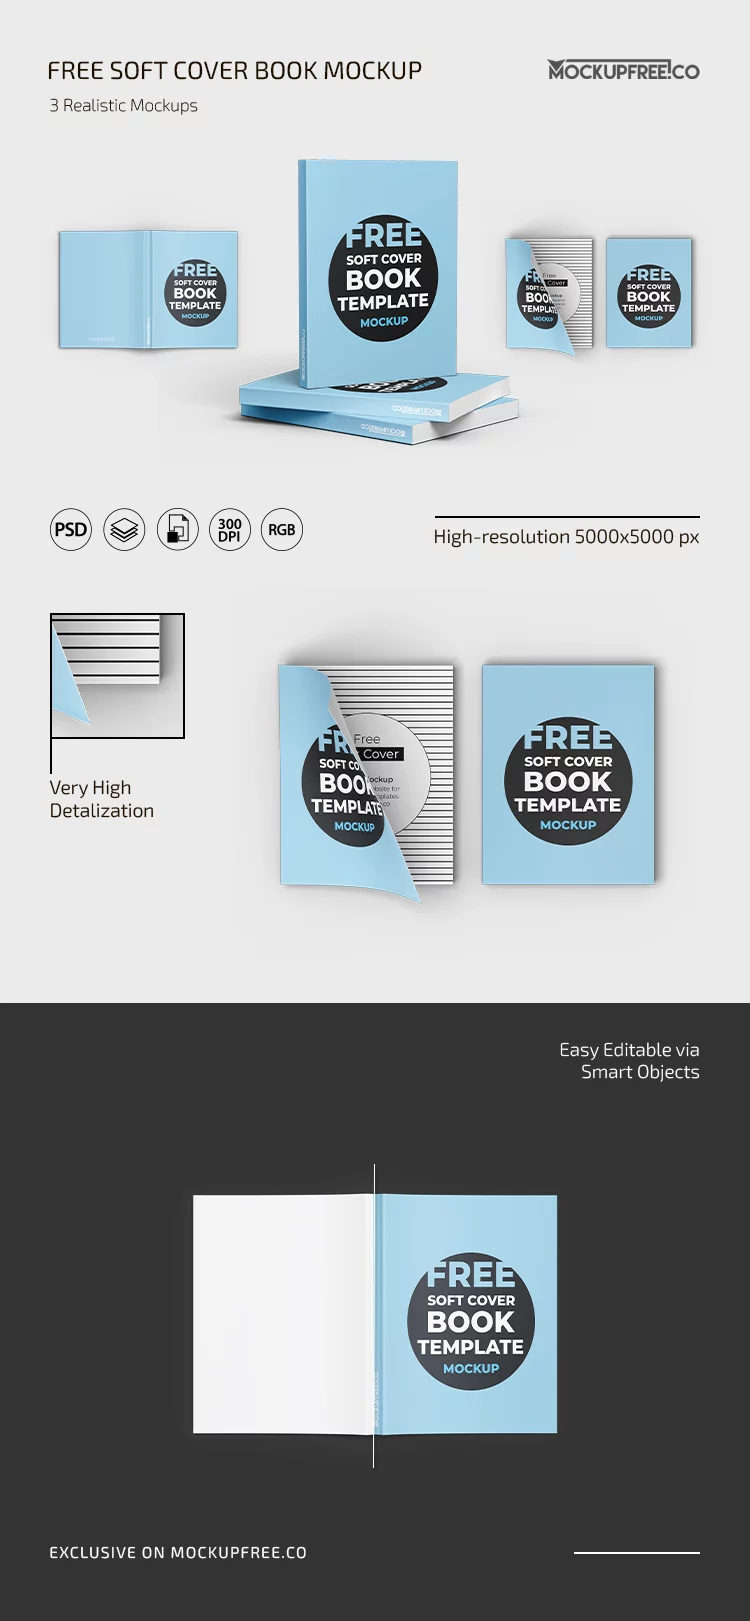 Free Soft Cover Book Mockup in PSD